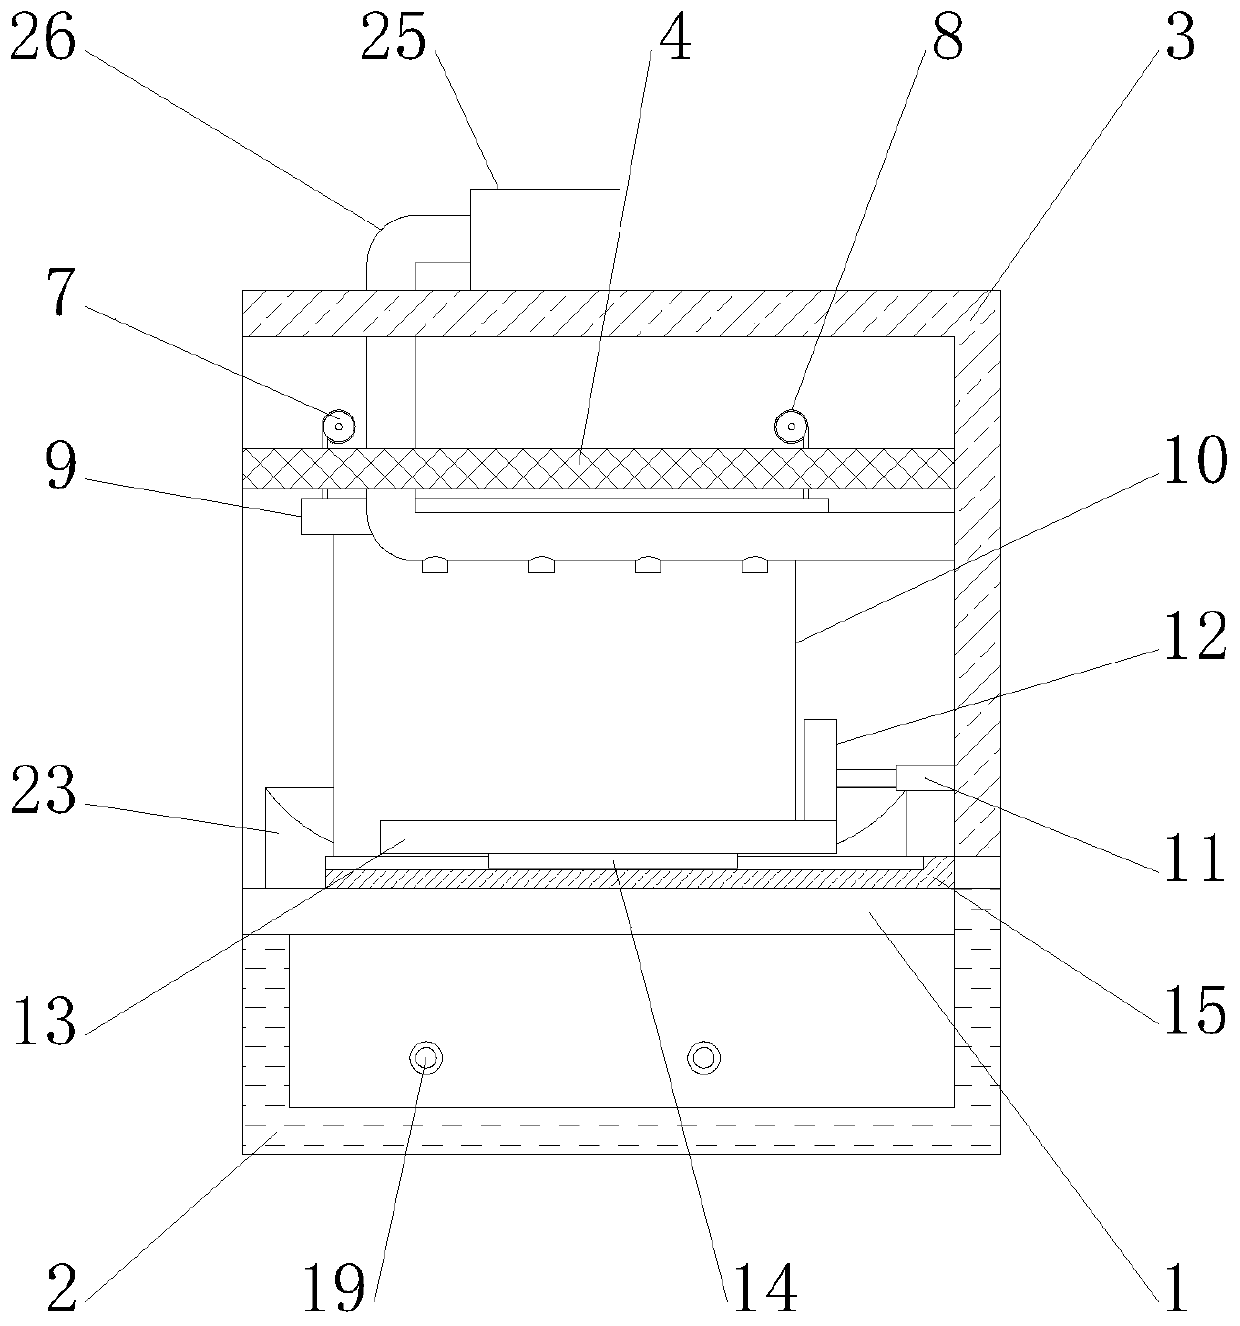 Thawing device used for meat processing